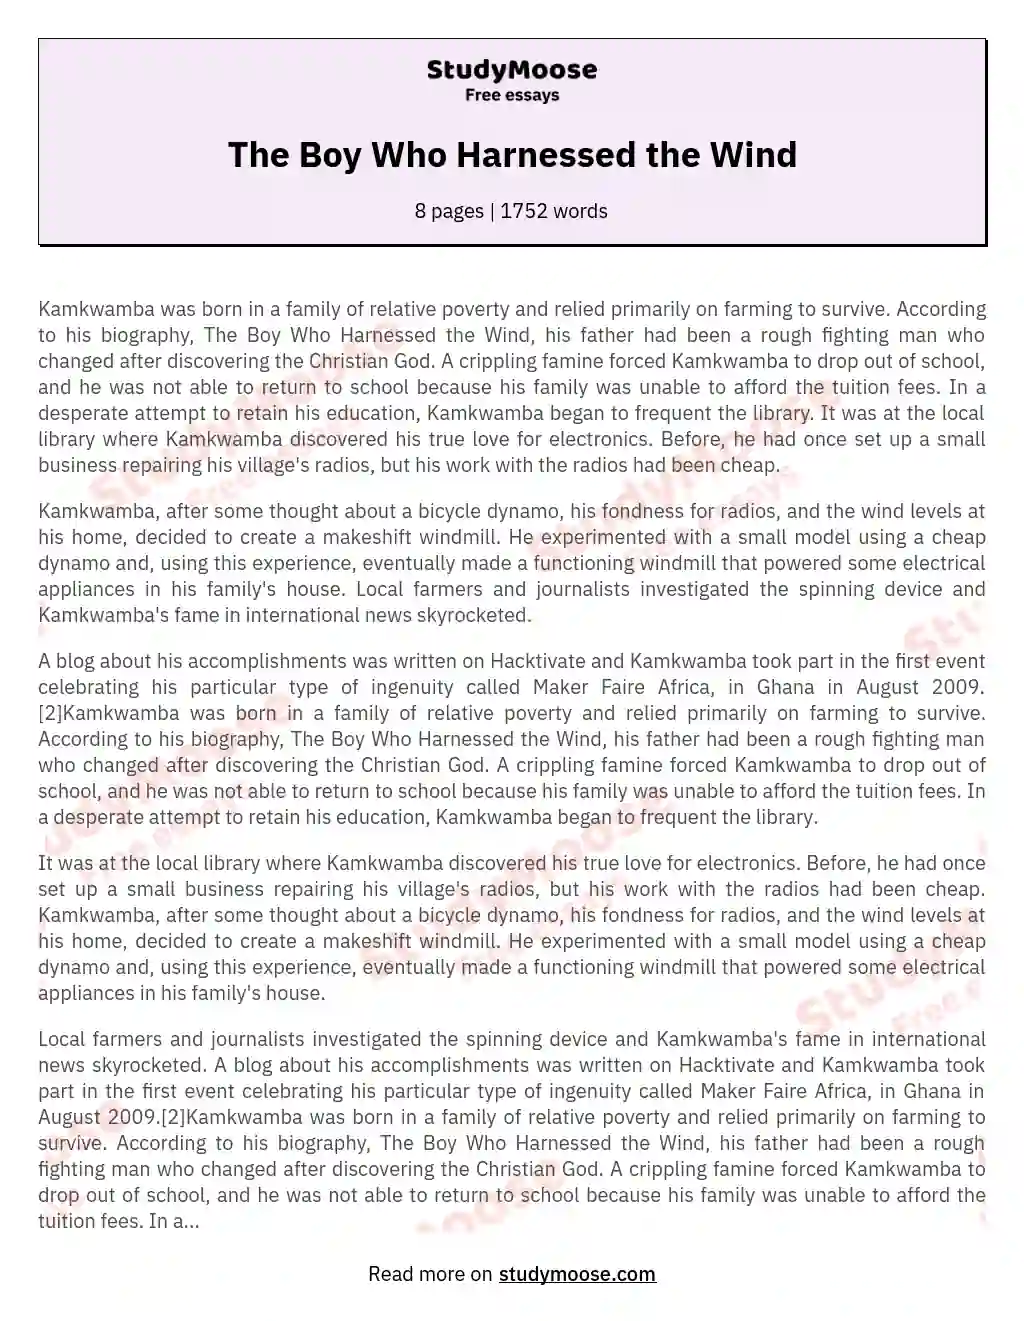 The Boy Who Harnessed the Wind essay